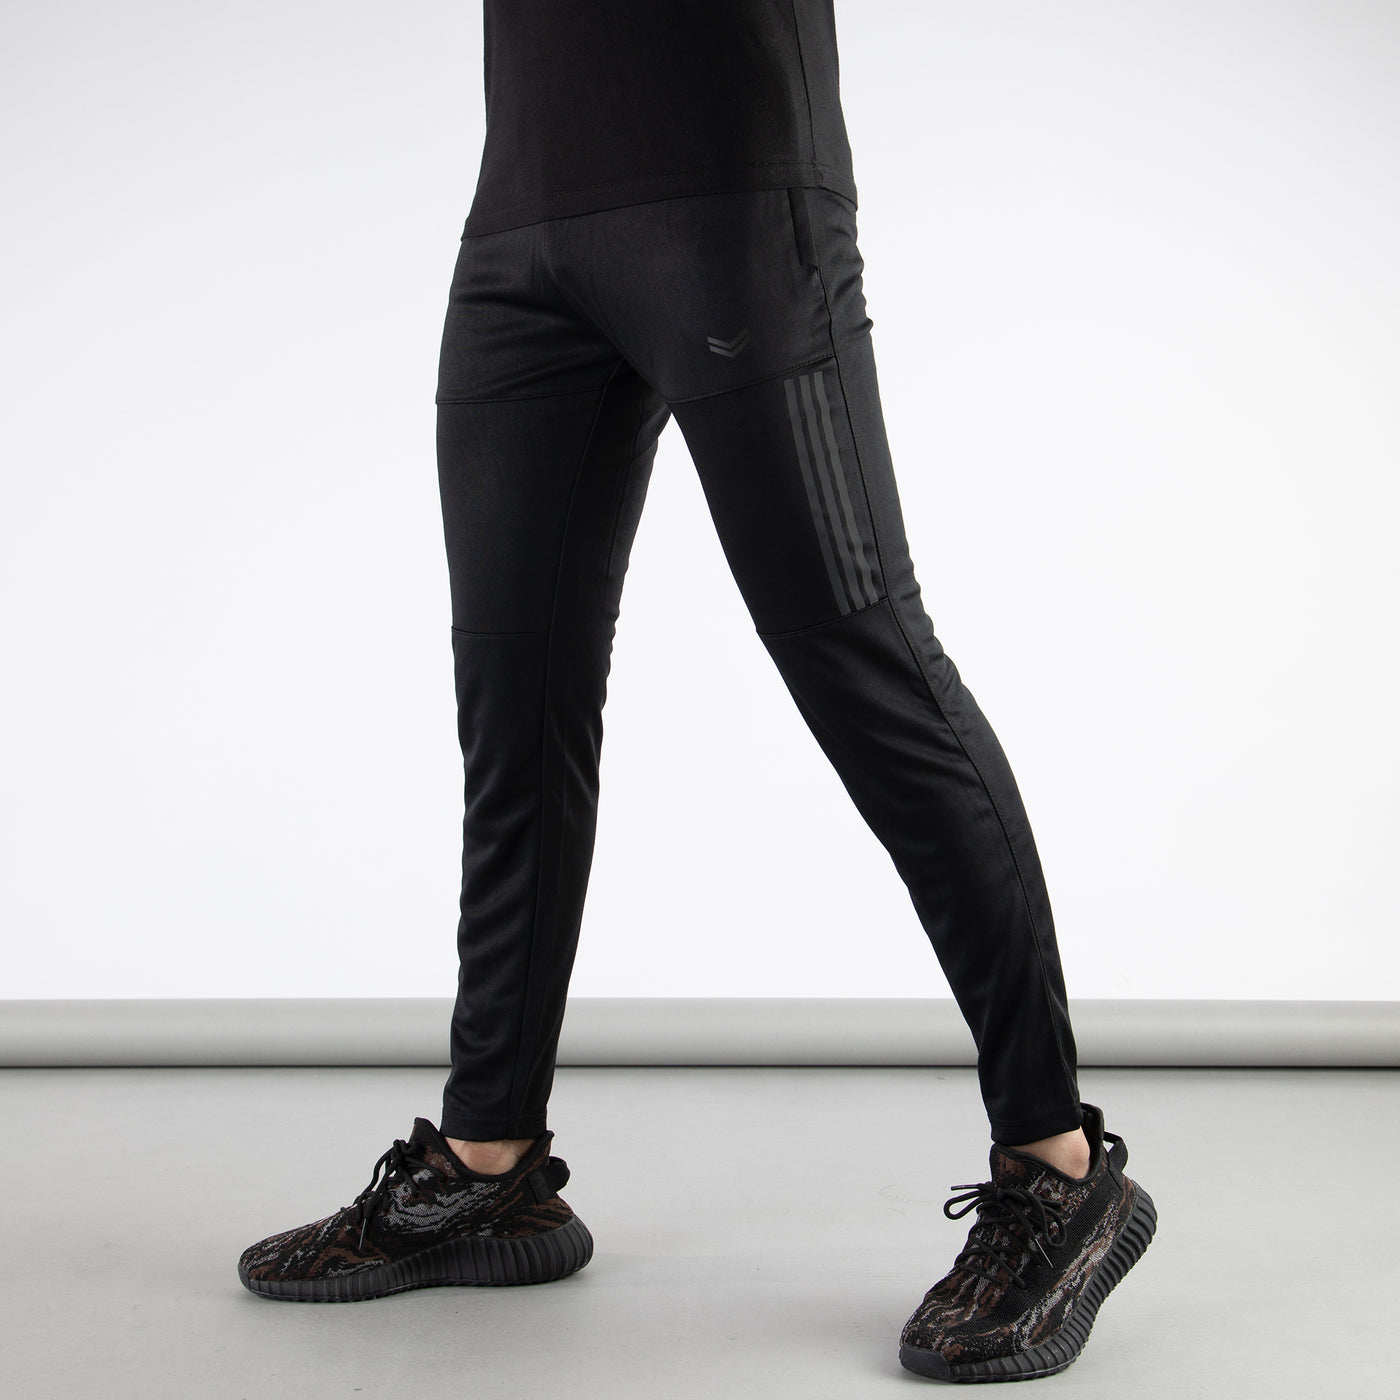 Black Quick Dry Bottoms with Three Carbon Reflective Stripes